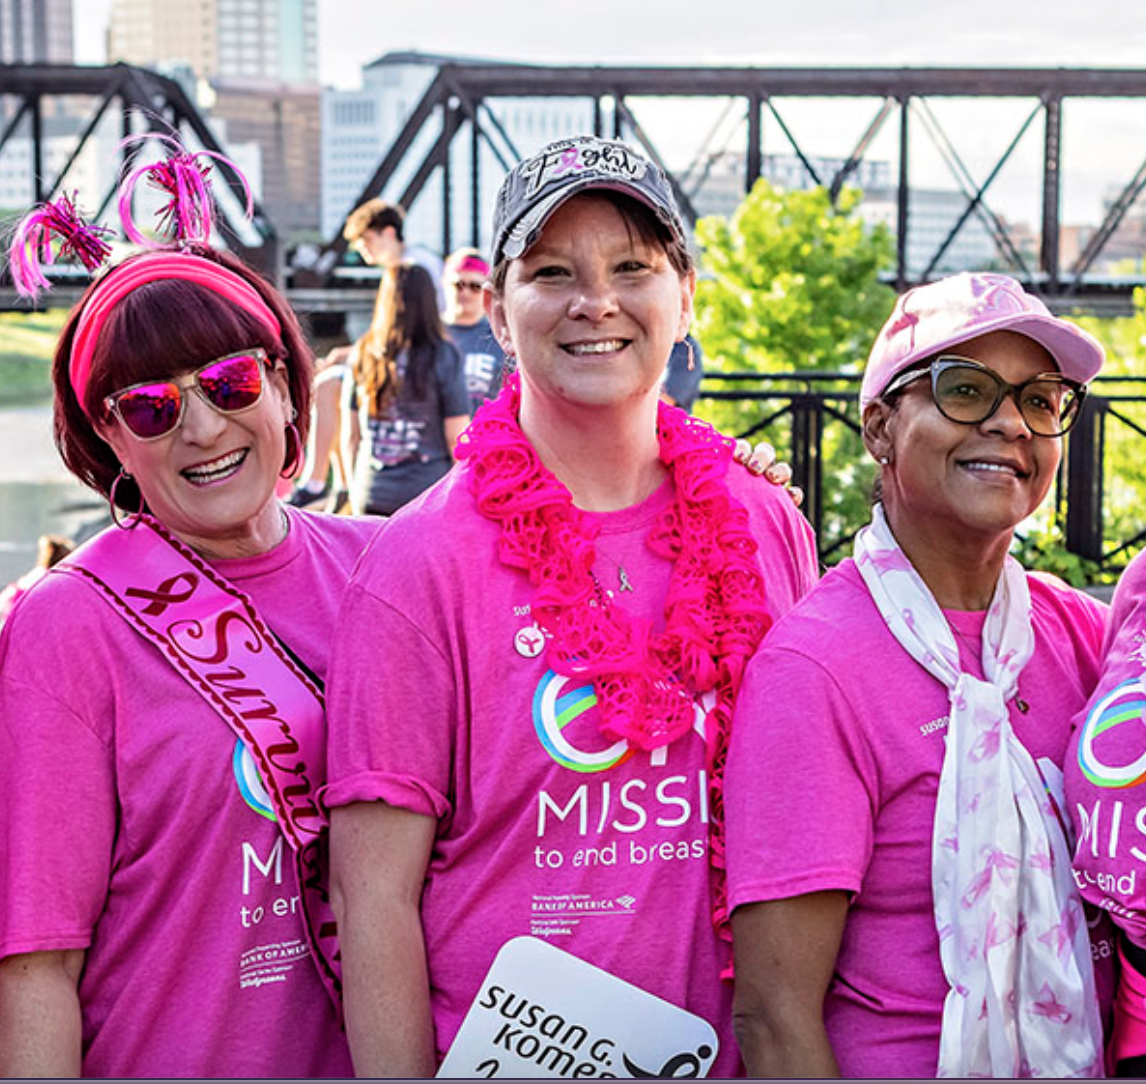 Stomp out breast cancer by joining More Than Pink Walk